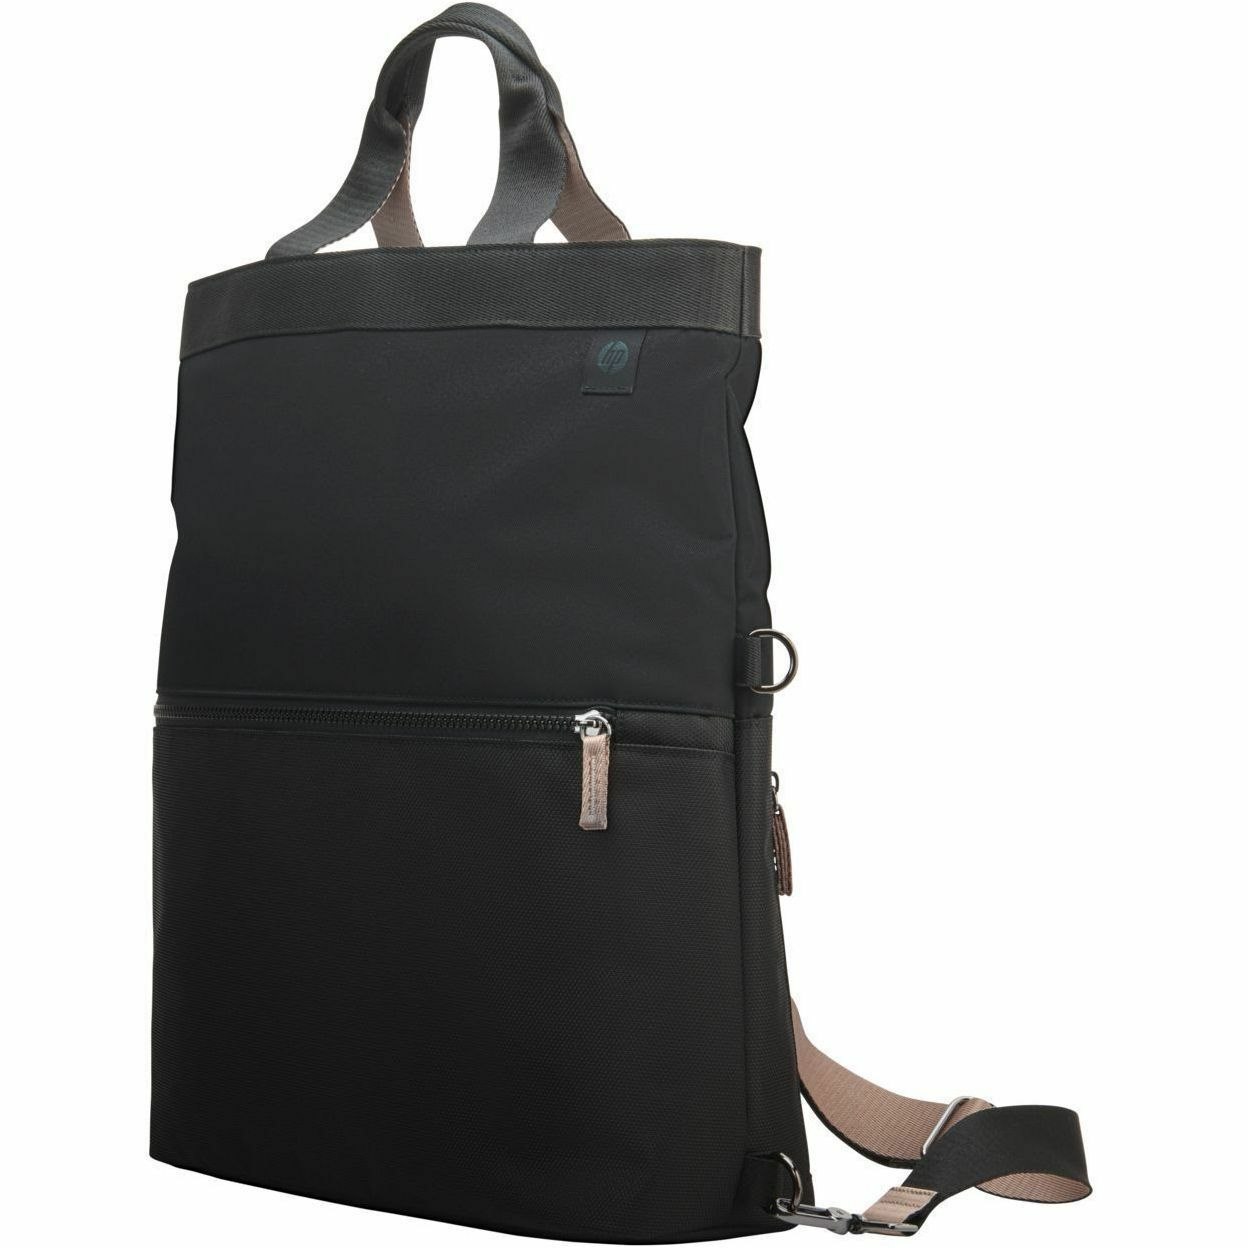 HP Carrying Case (Backpack/Tote) for 35.6 cm (14") to 35.8 cm (14.1") Notebook - Black, Taupe